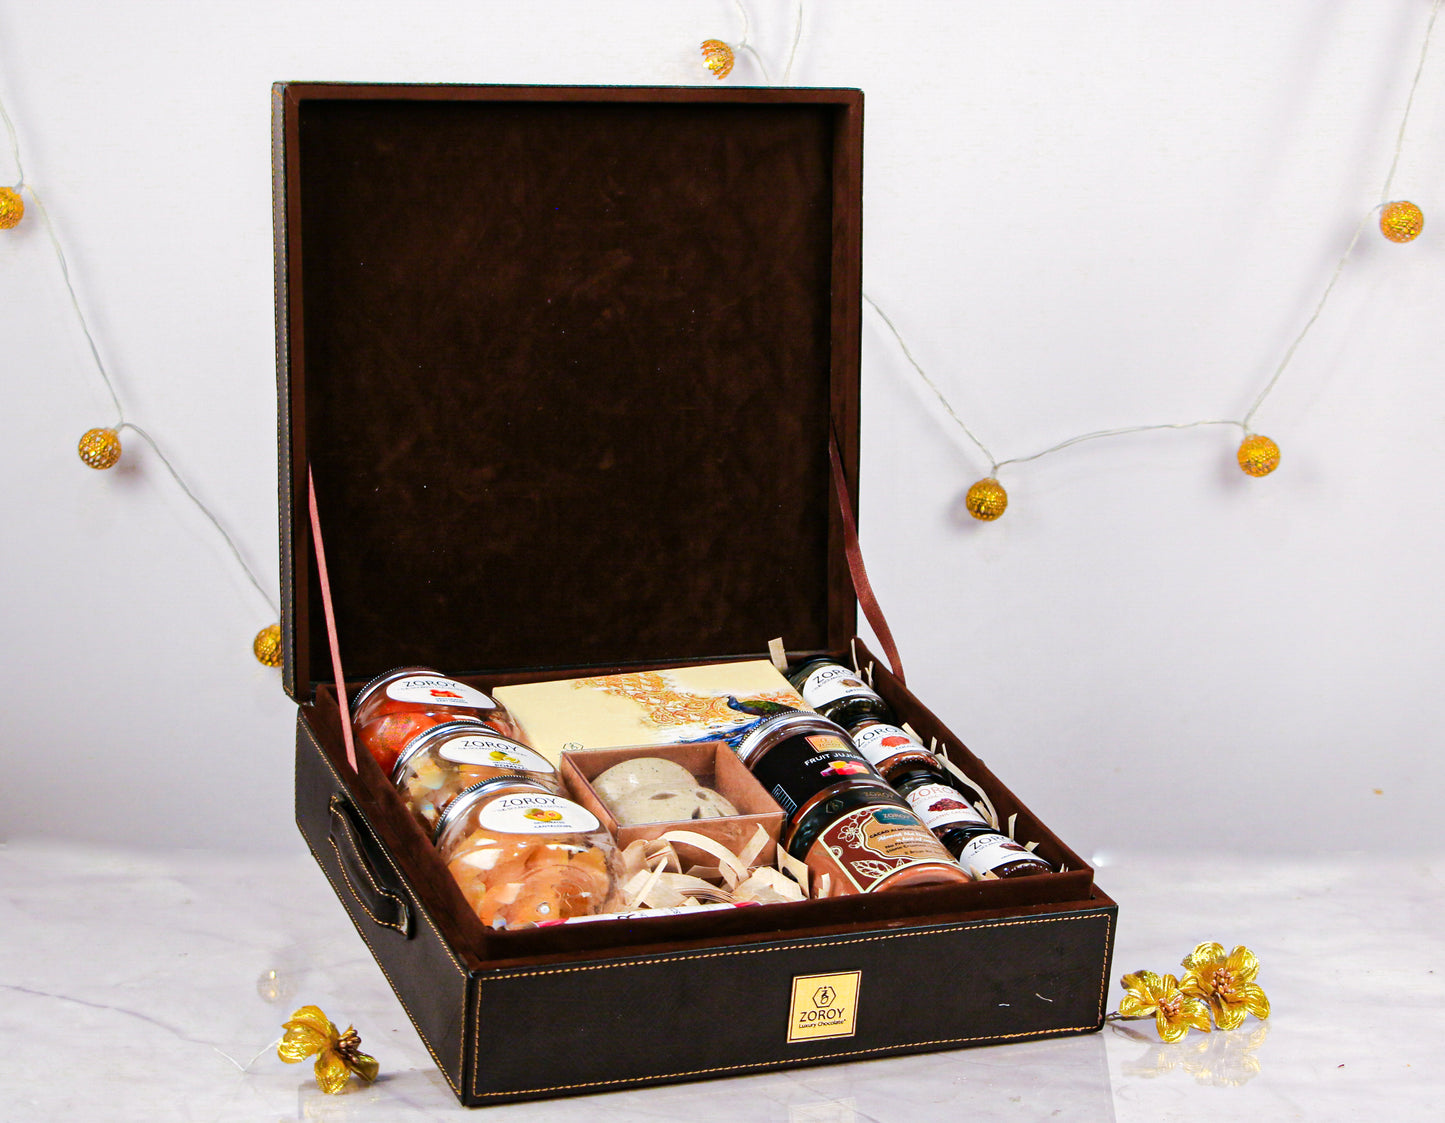 ZOROY Art Leather hamper box filled with chocolates and other goodies